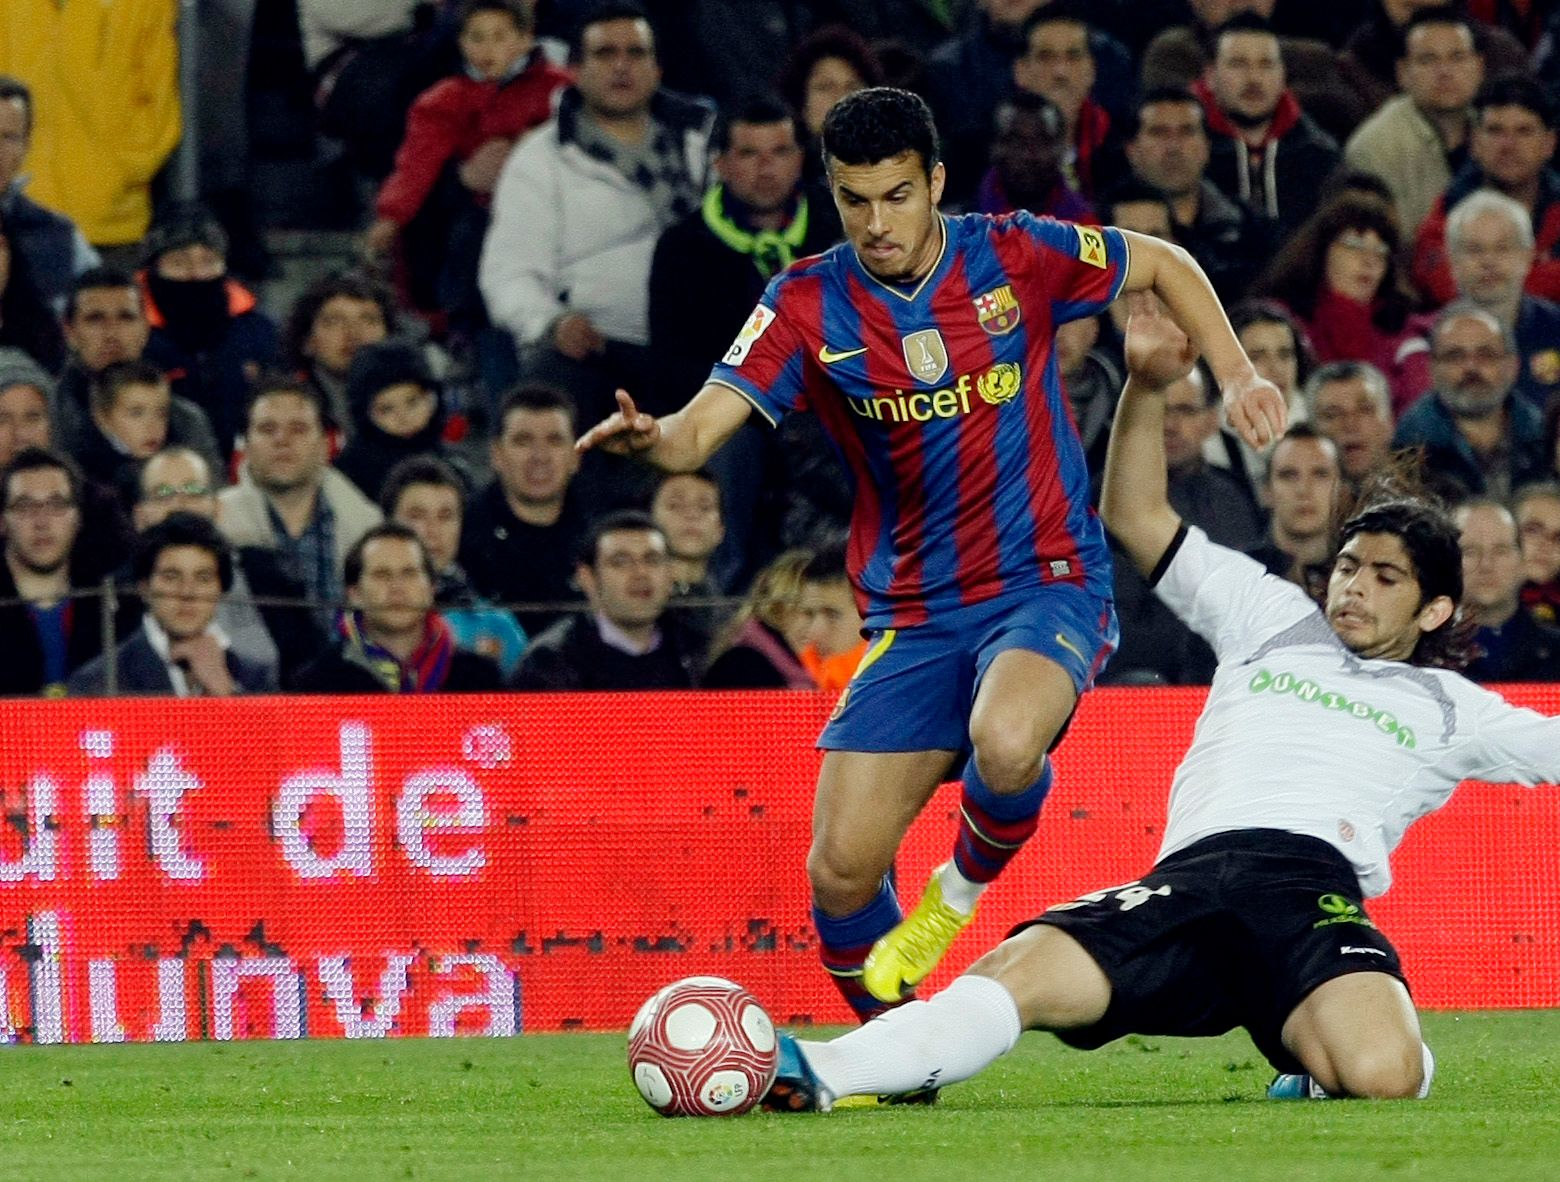 Barcelona's Pedro (L) is challenged by Valencia's Ever Banega during their Spanish first division soccer match at Nou Camp stadium in Barcelona March 14, 2010.   REUTERS/Gustau Nacarino  (SPAIN - Tags: SPORT SOCCER)